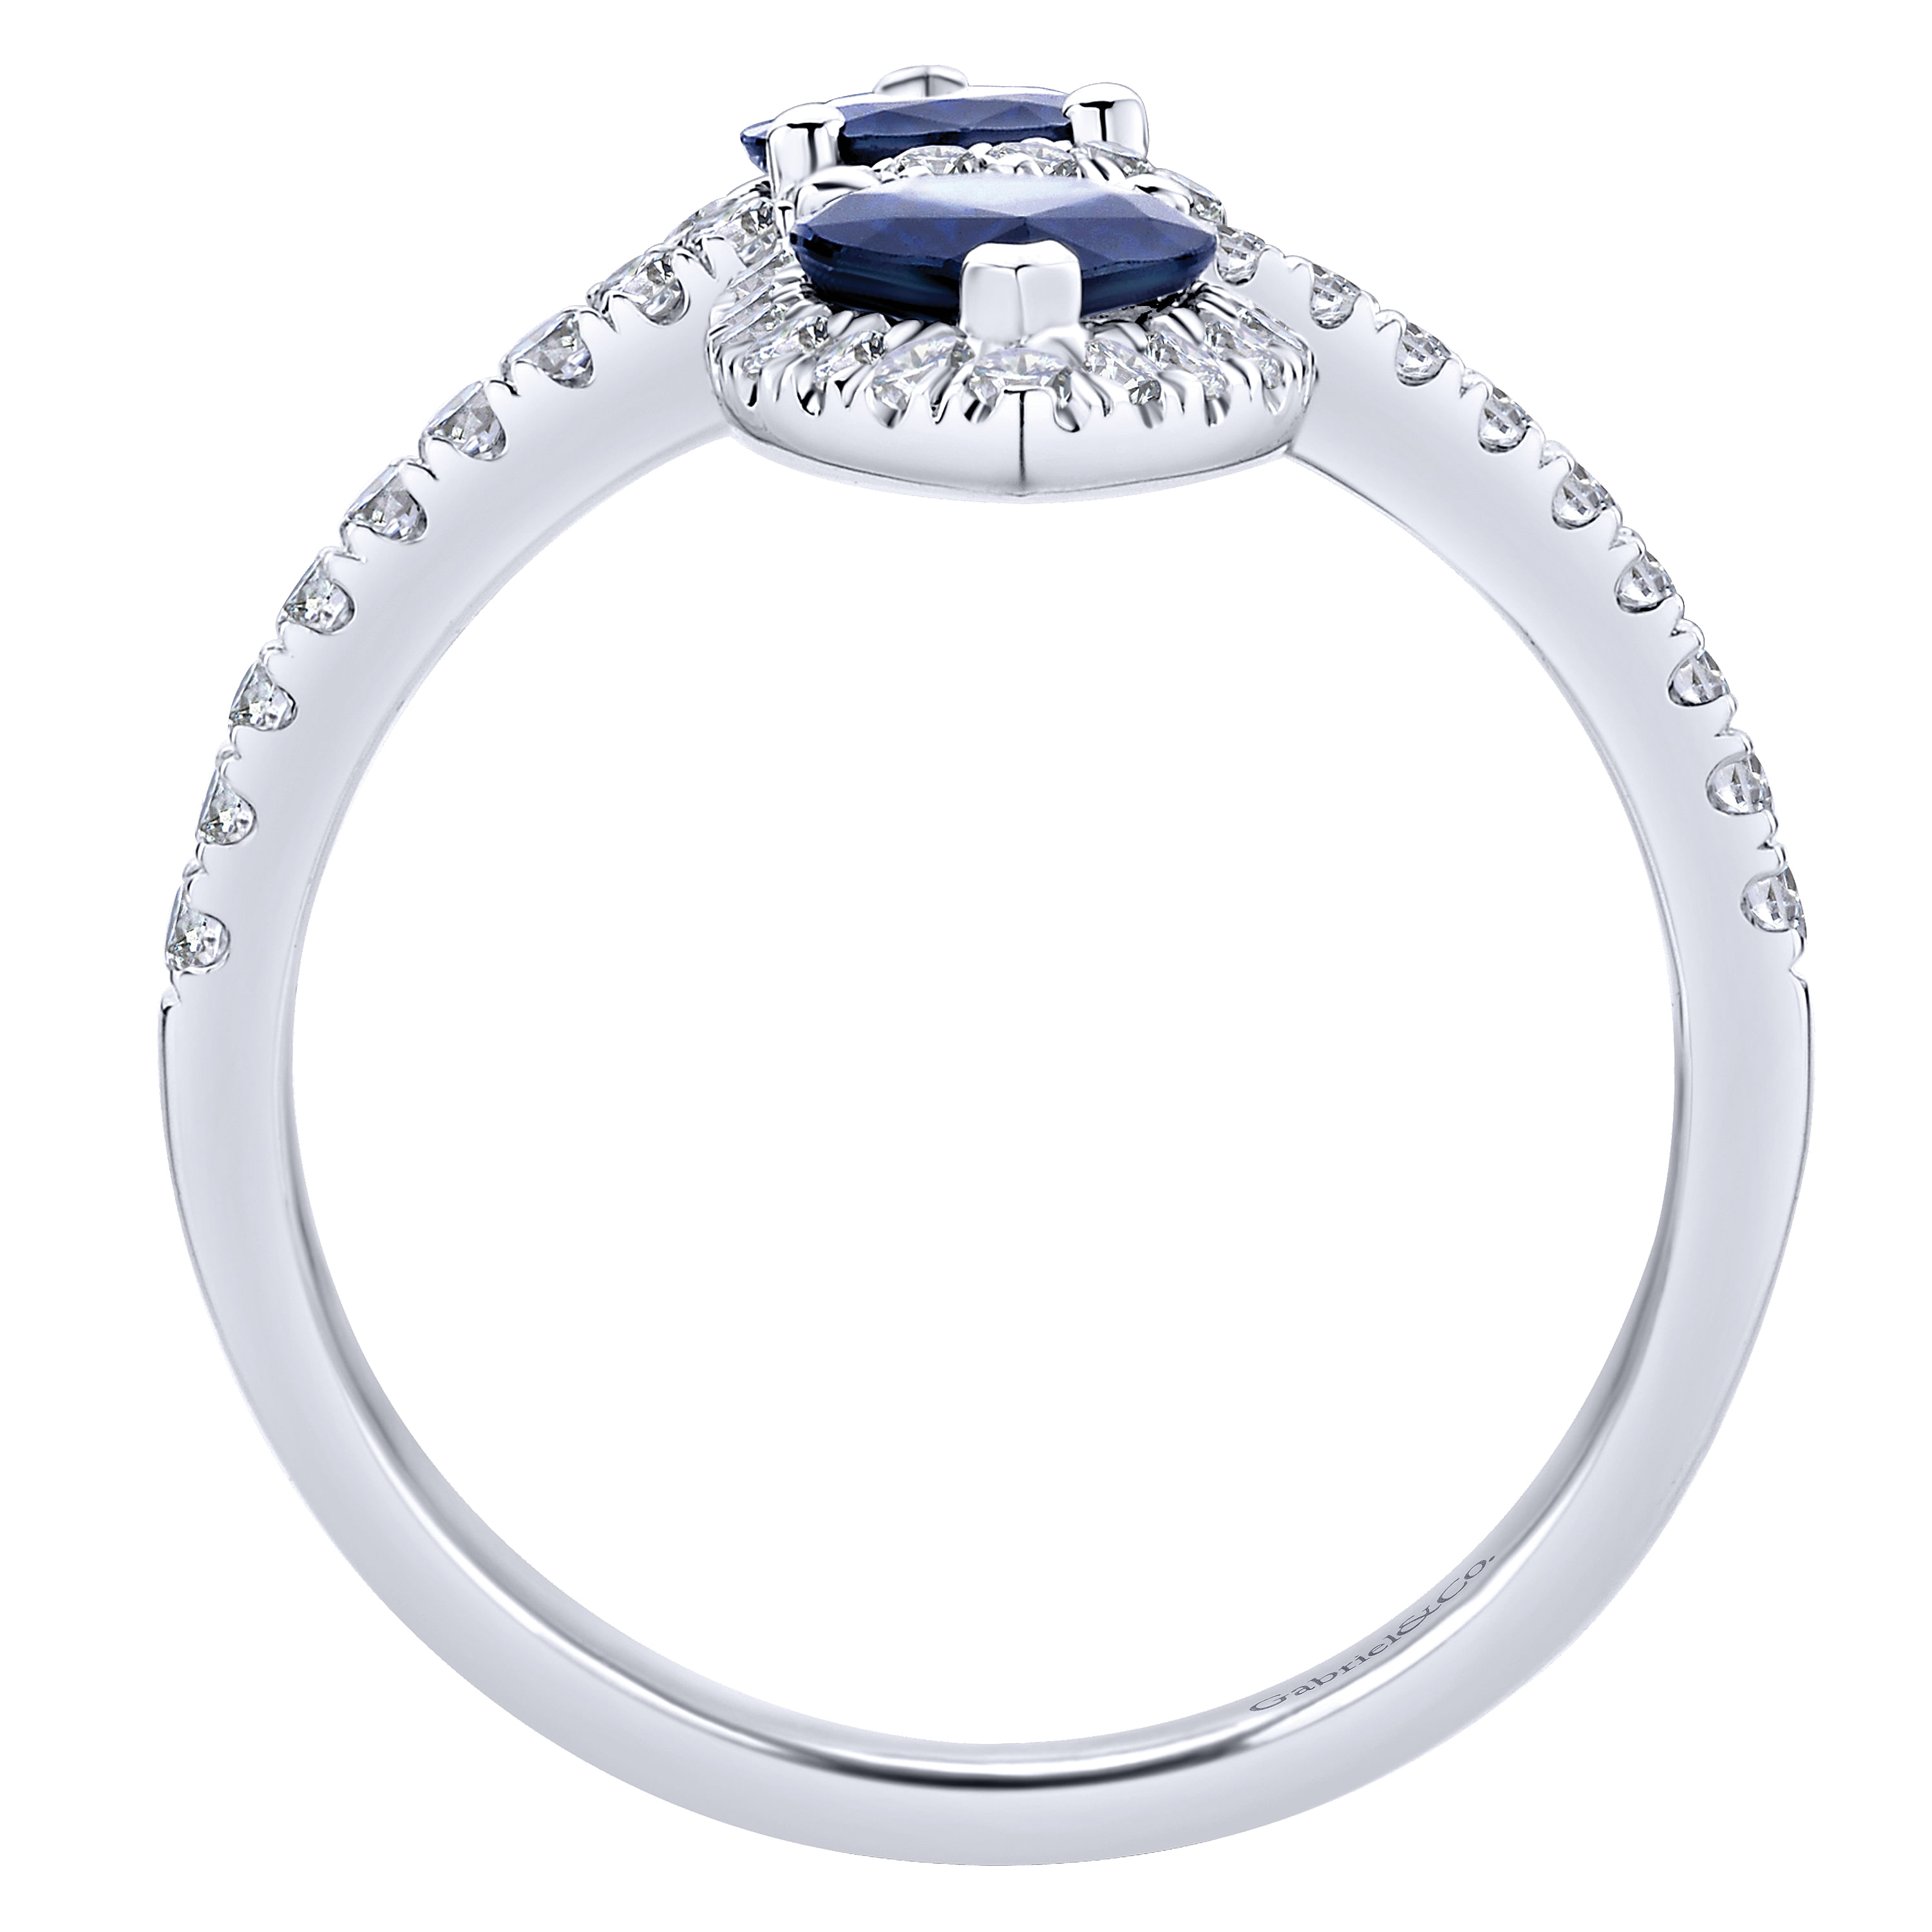 14k White Gold Pear Shaped Sapphire and Diamond Wrap Ring